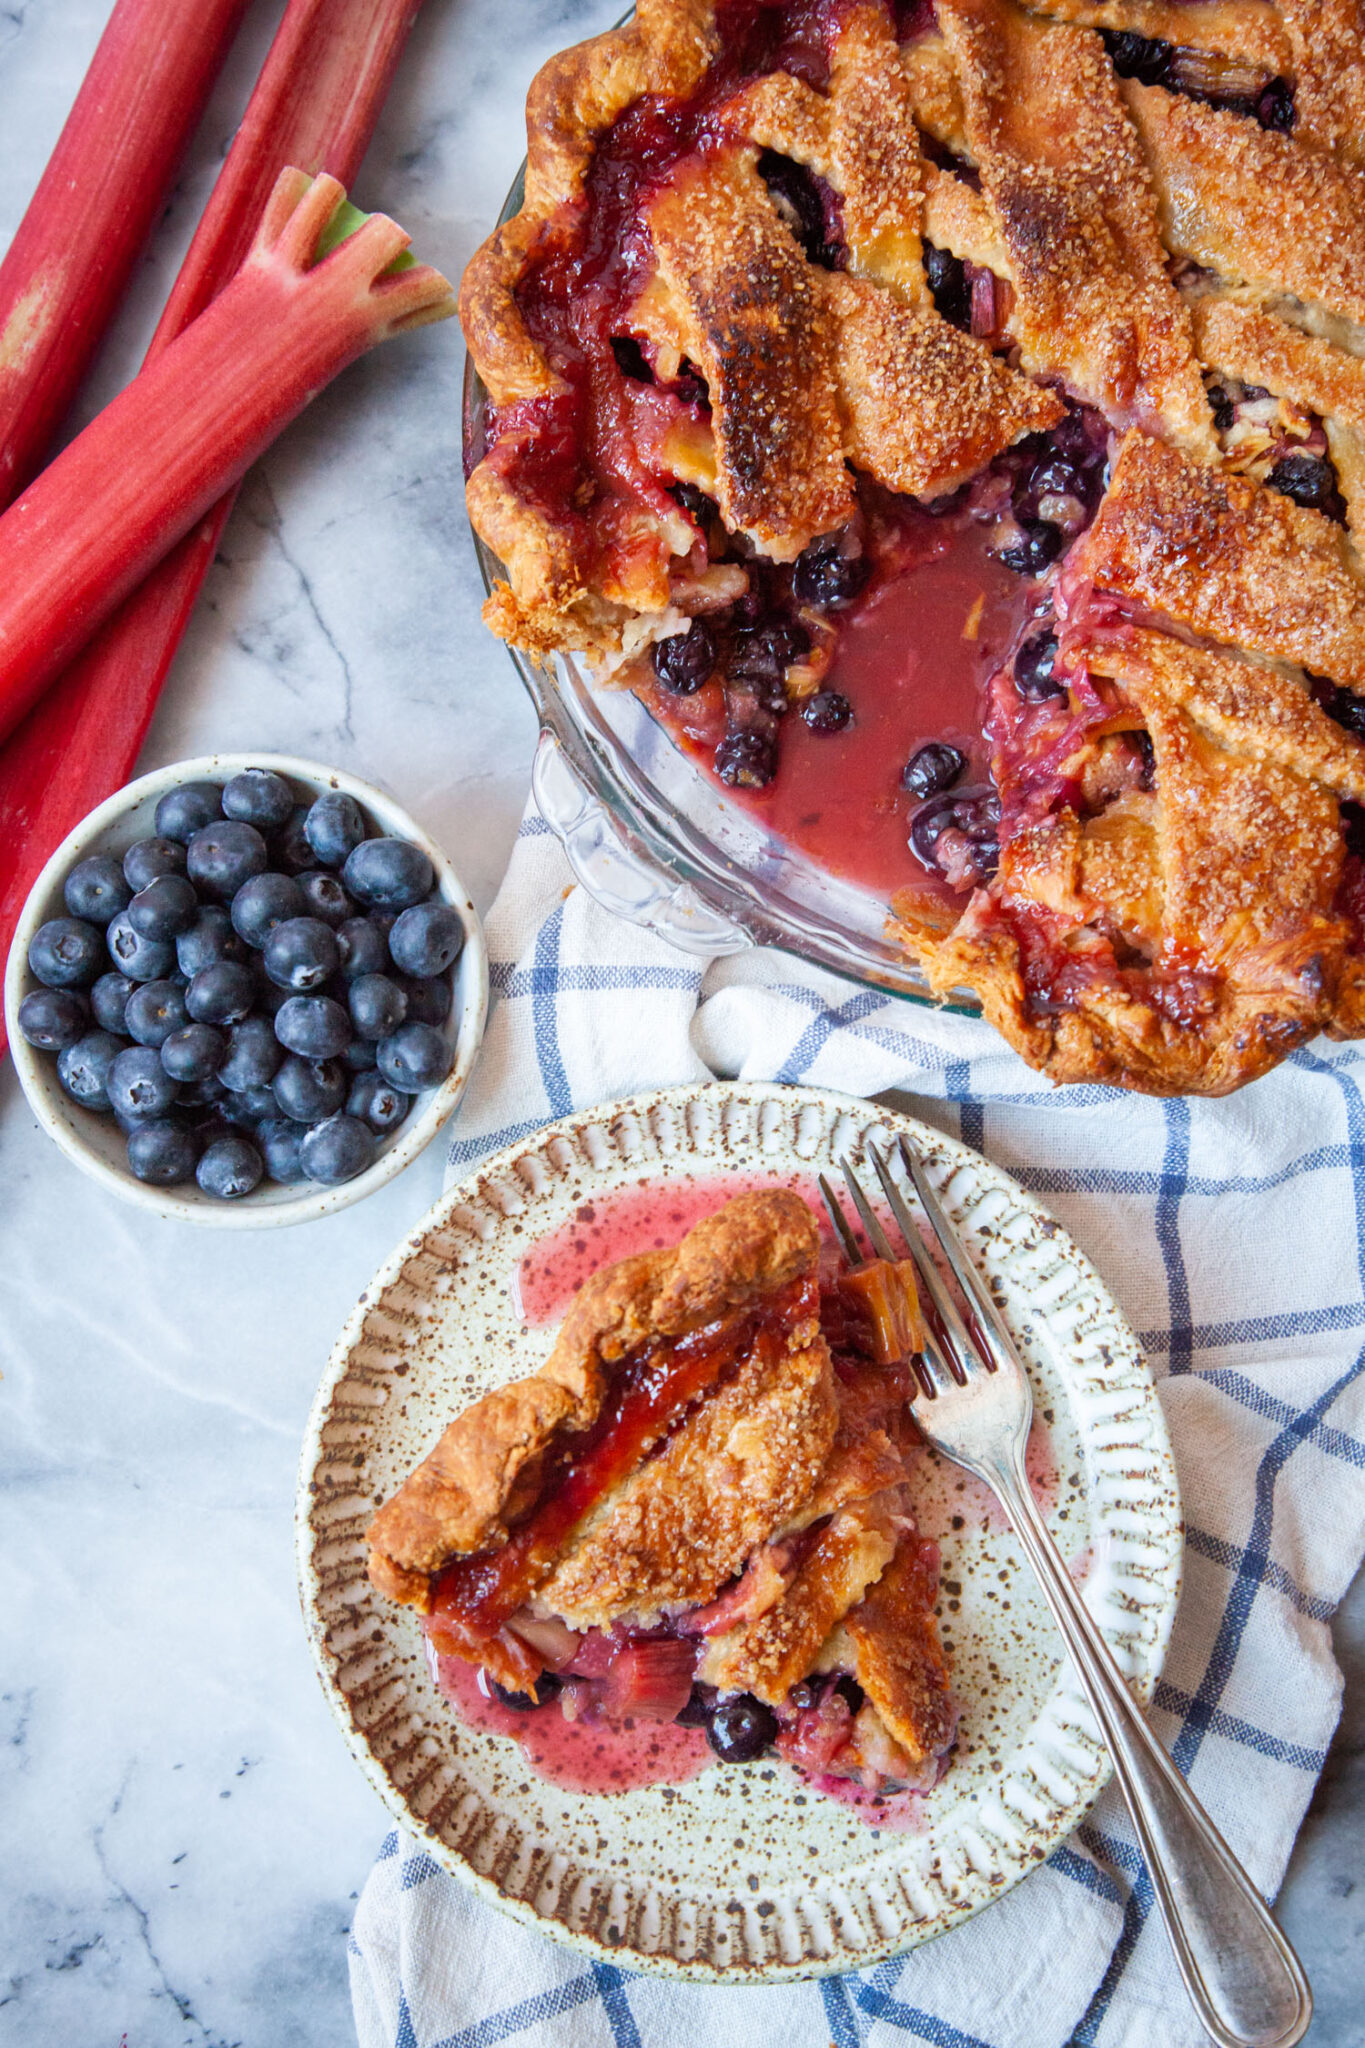 A slice of blueberry rhubarb pie on a plate, with the remaining pie next to it. Stalks of rhubarb and a small bowl of blueberries are next to the pie.